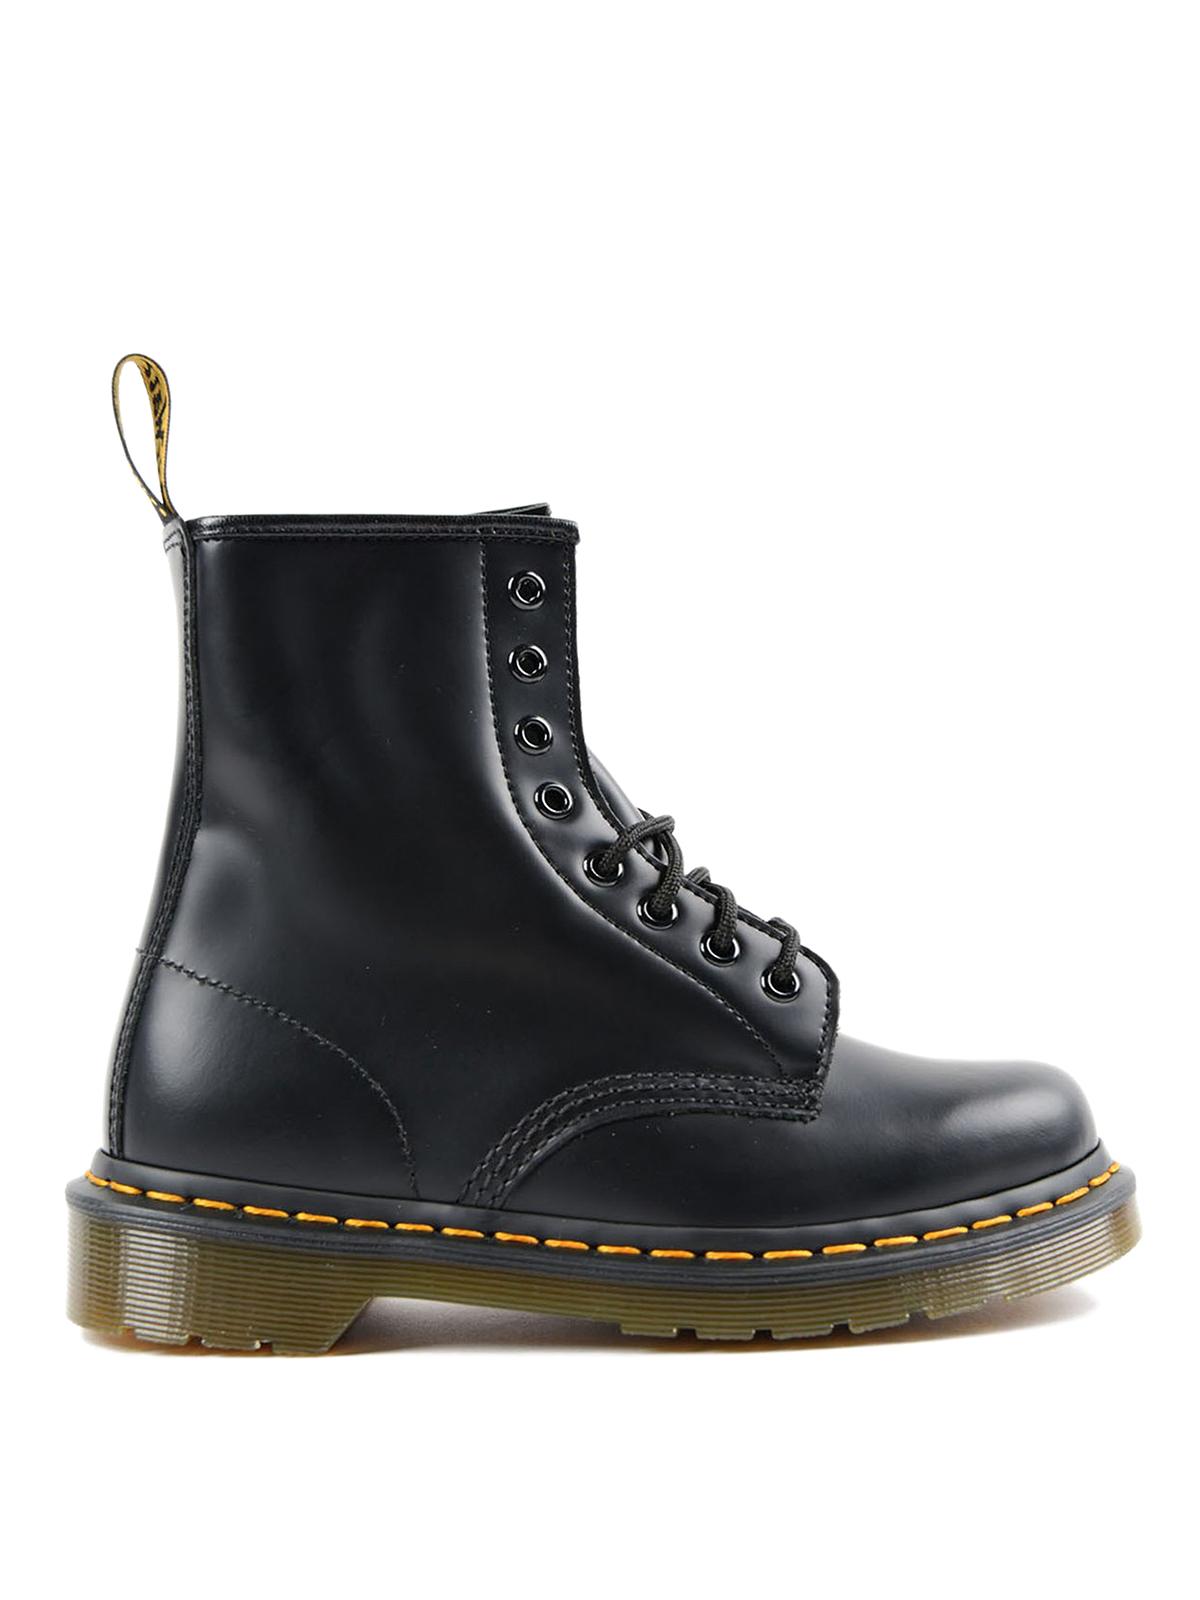 Dr. Martens Black Smooth Leather Combat Boots - Lyst